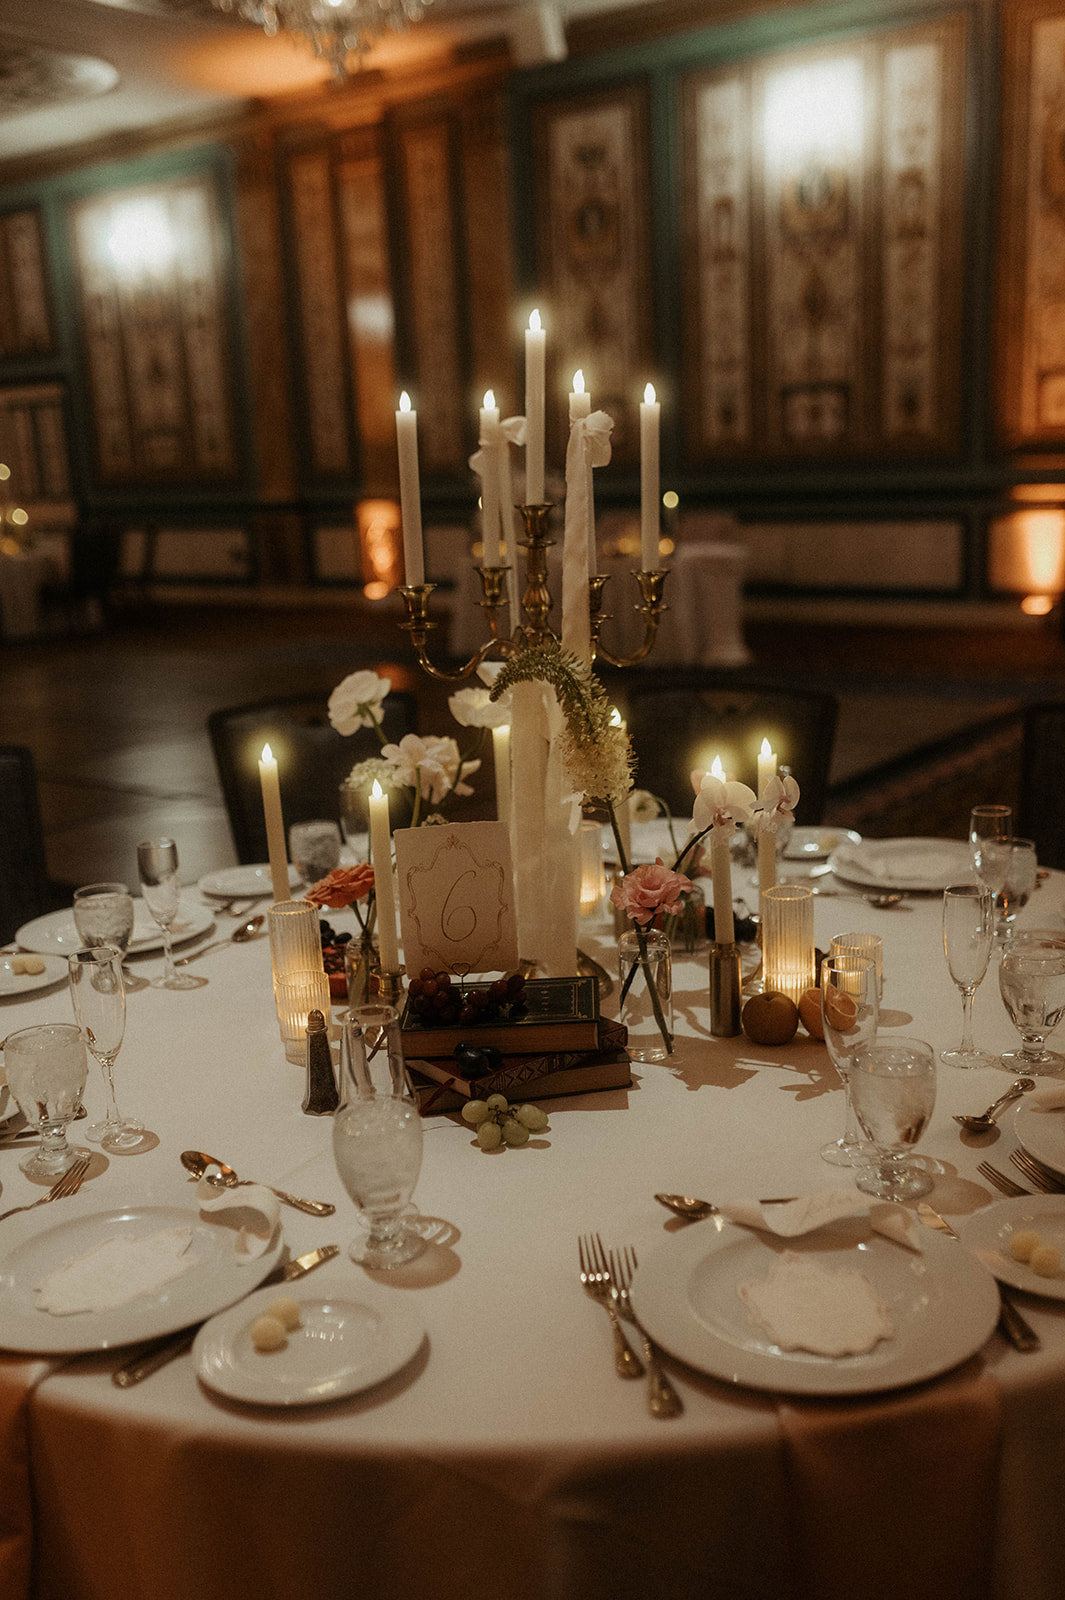 Elegant wedding reception table set for a dinner under a grand chandelier, with ornate wall panels and numerous lit candles for a bridgerton themed wedding